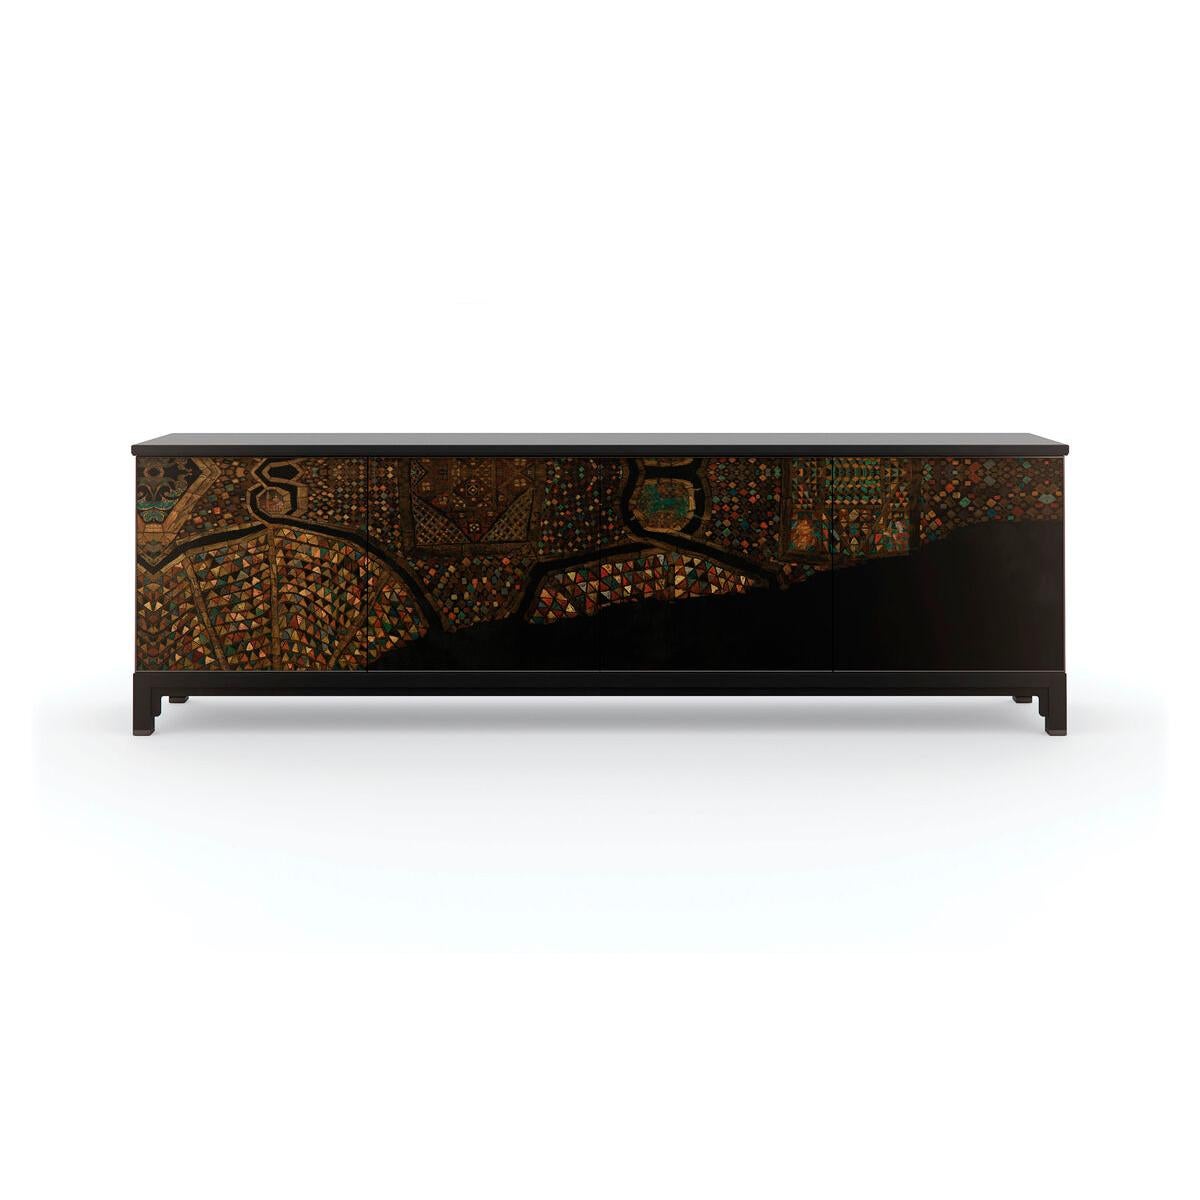 Inspired by Silk Road, an expressive portrayal of the infamous road from Xi'an to Constantinople as painted by artist Iris Feng. A reproduction of original artwork was digitally printed on canvas and hand-applied to the wood door fronts.

Encased in